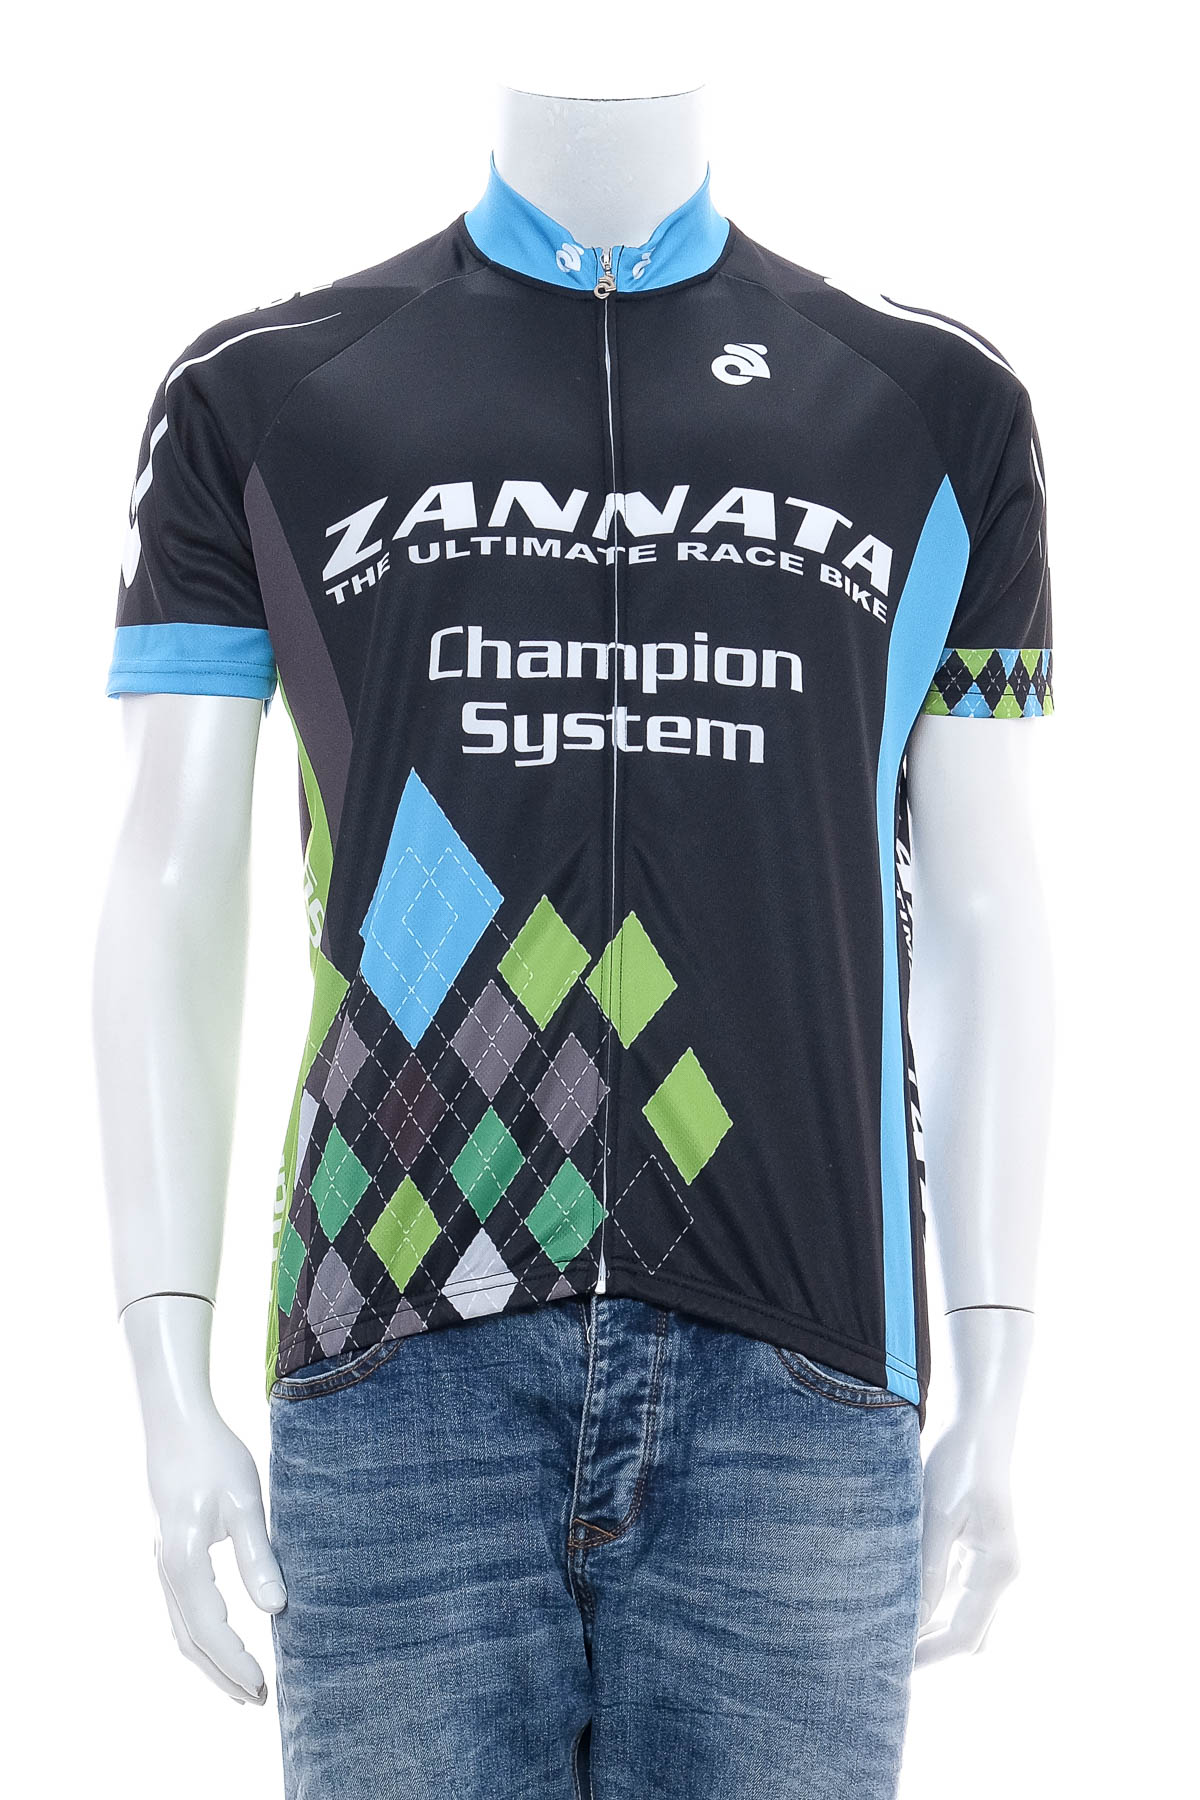 Male sports top for cycling - Champion System - 0